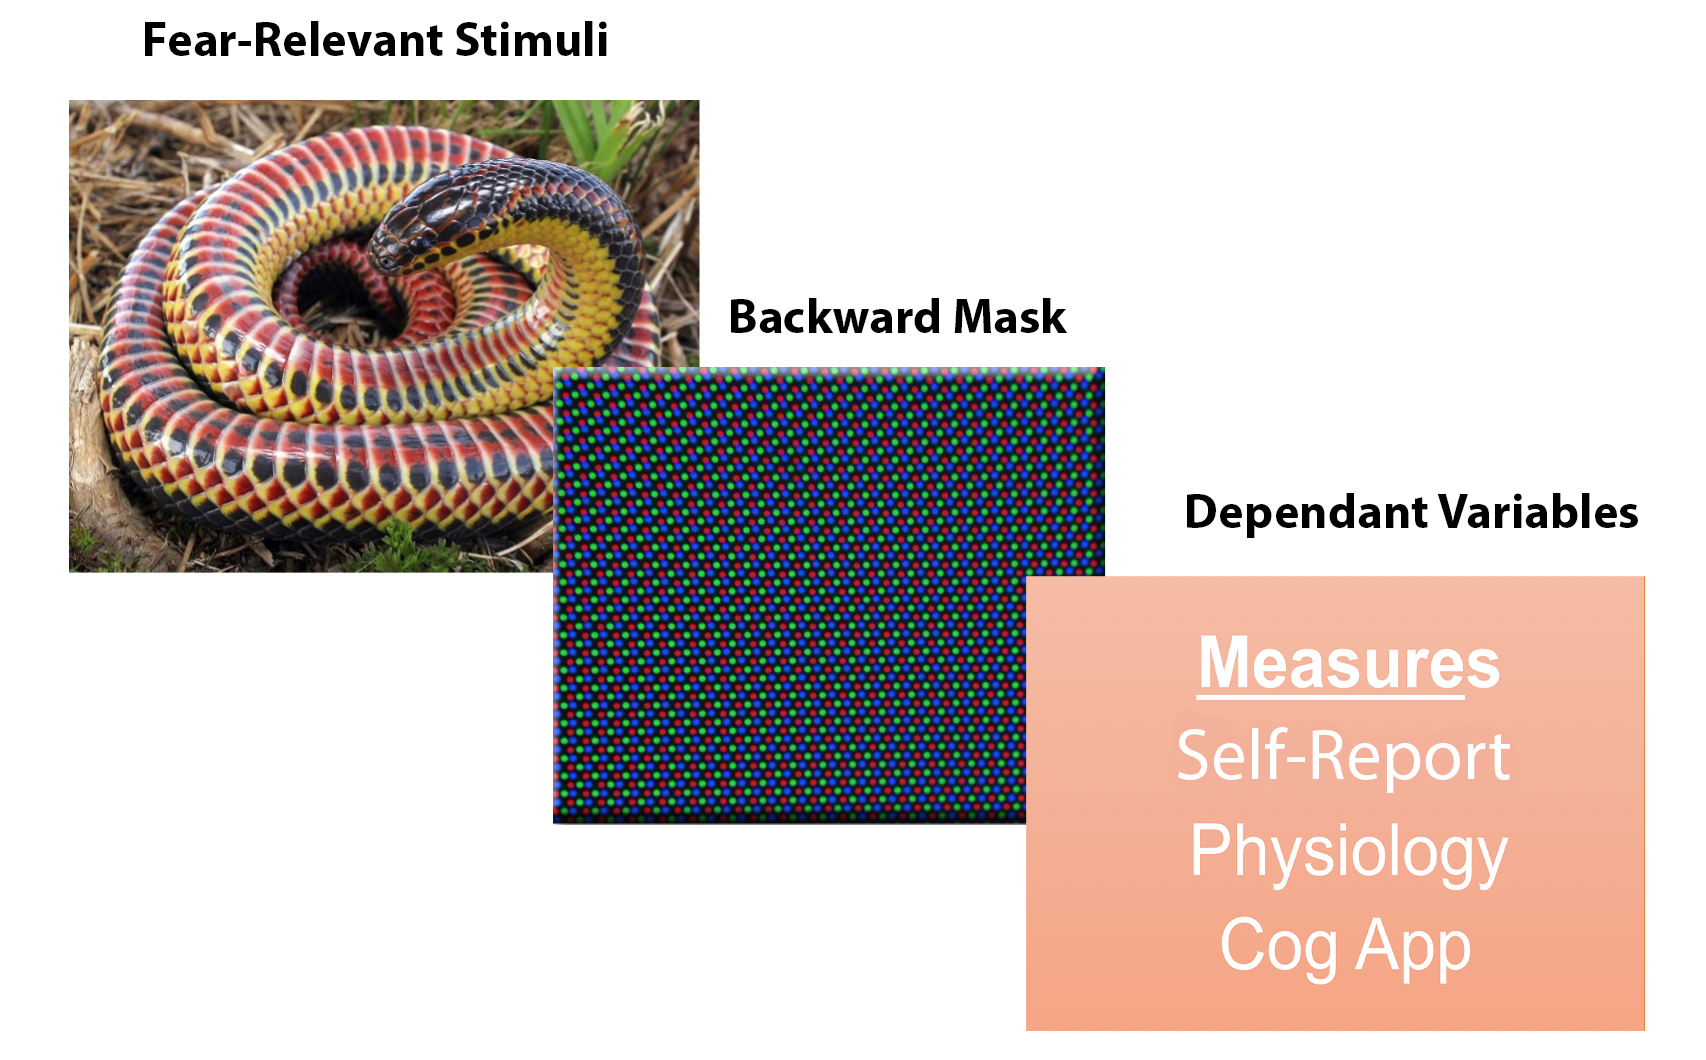 Fear-relevant stimuli, a photo of a snake. Backward mask, a photo of red, blue, green dots. Dependant Variables, photo of text that reads: Measures - self-report, physiology, cognitive appraisal